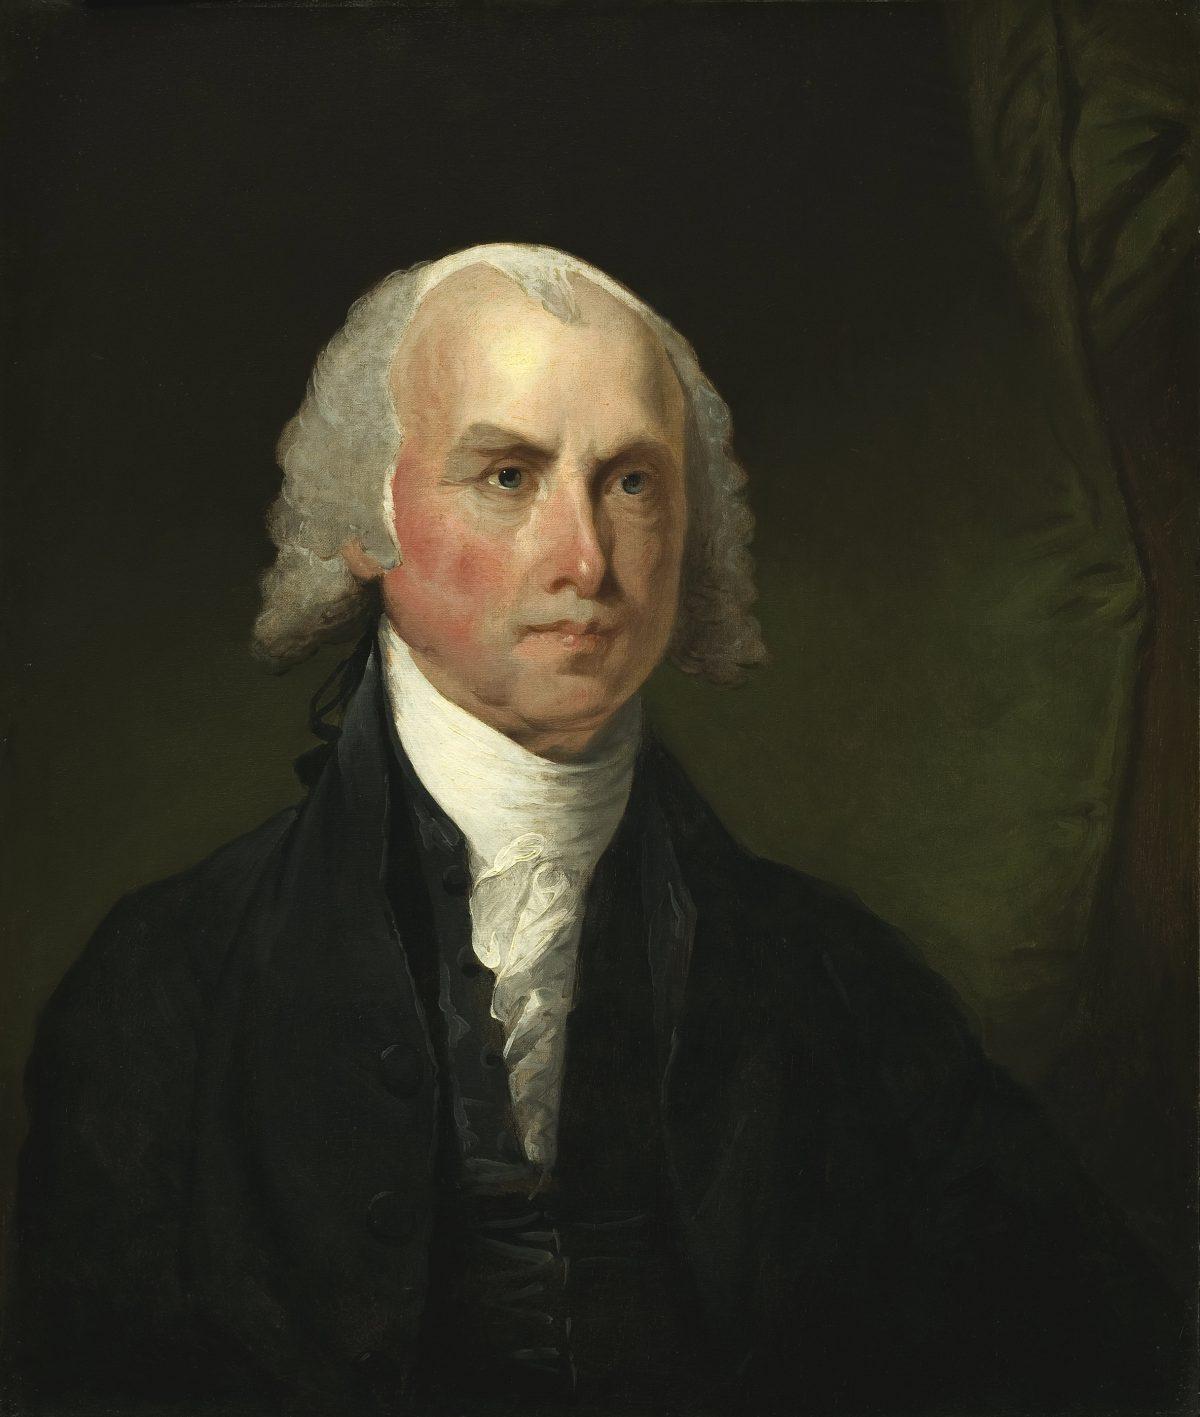 James Madison, the fourth president of the United States, who complained of Patrick Henry's partisan gerrymander. (Painting by Gilbert Stuart in National Gallery of Art via Wikimedia Commons)